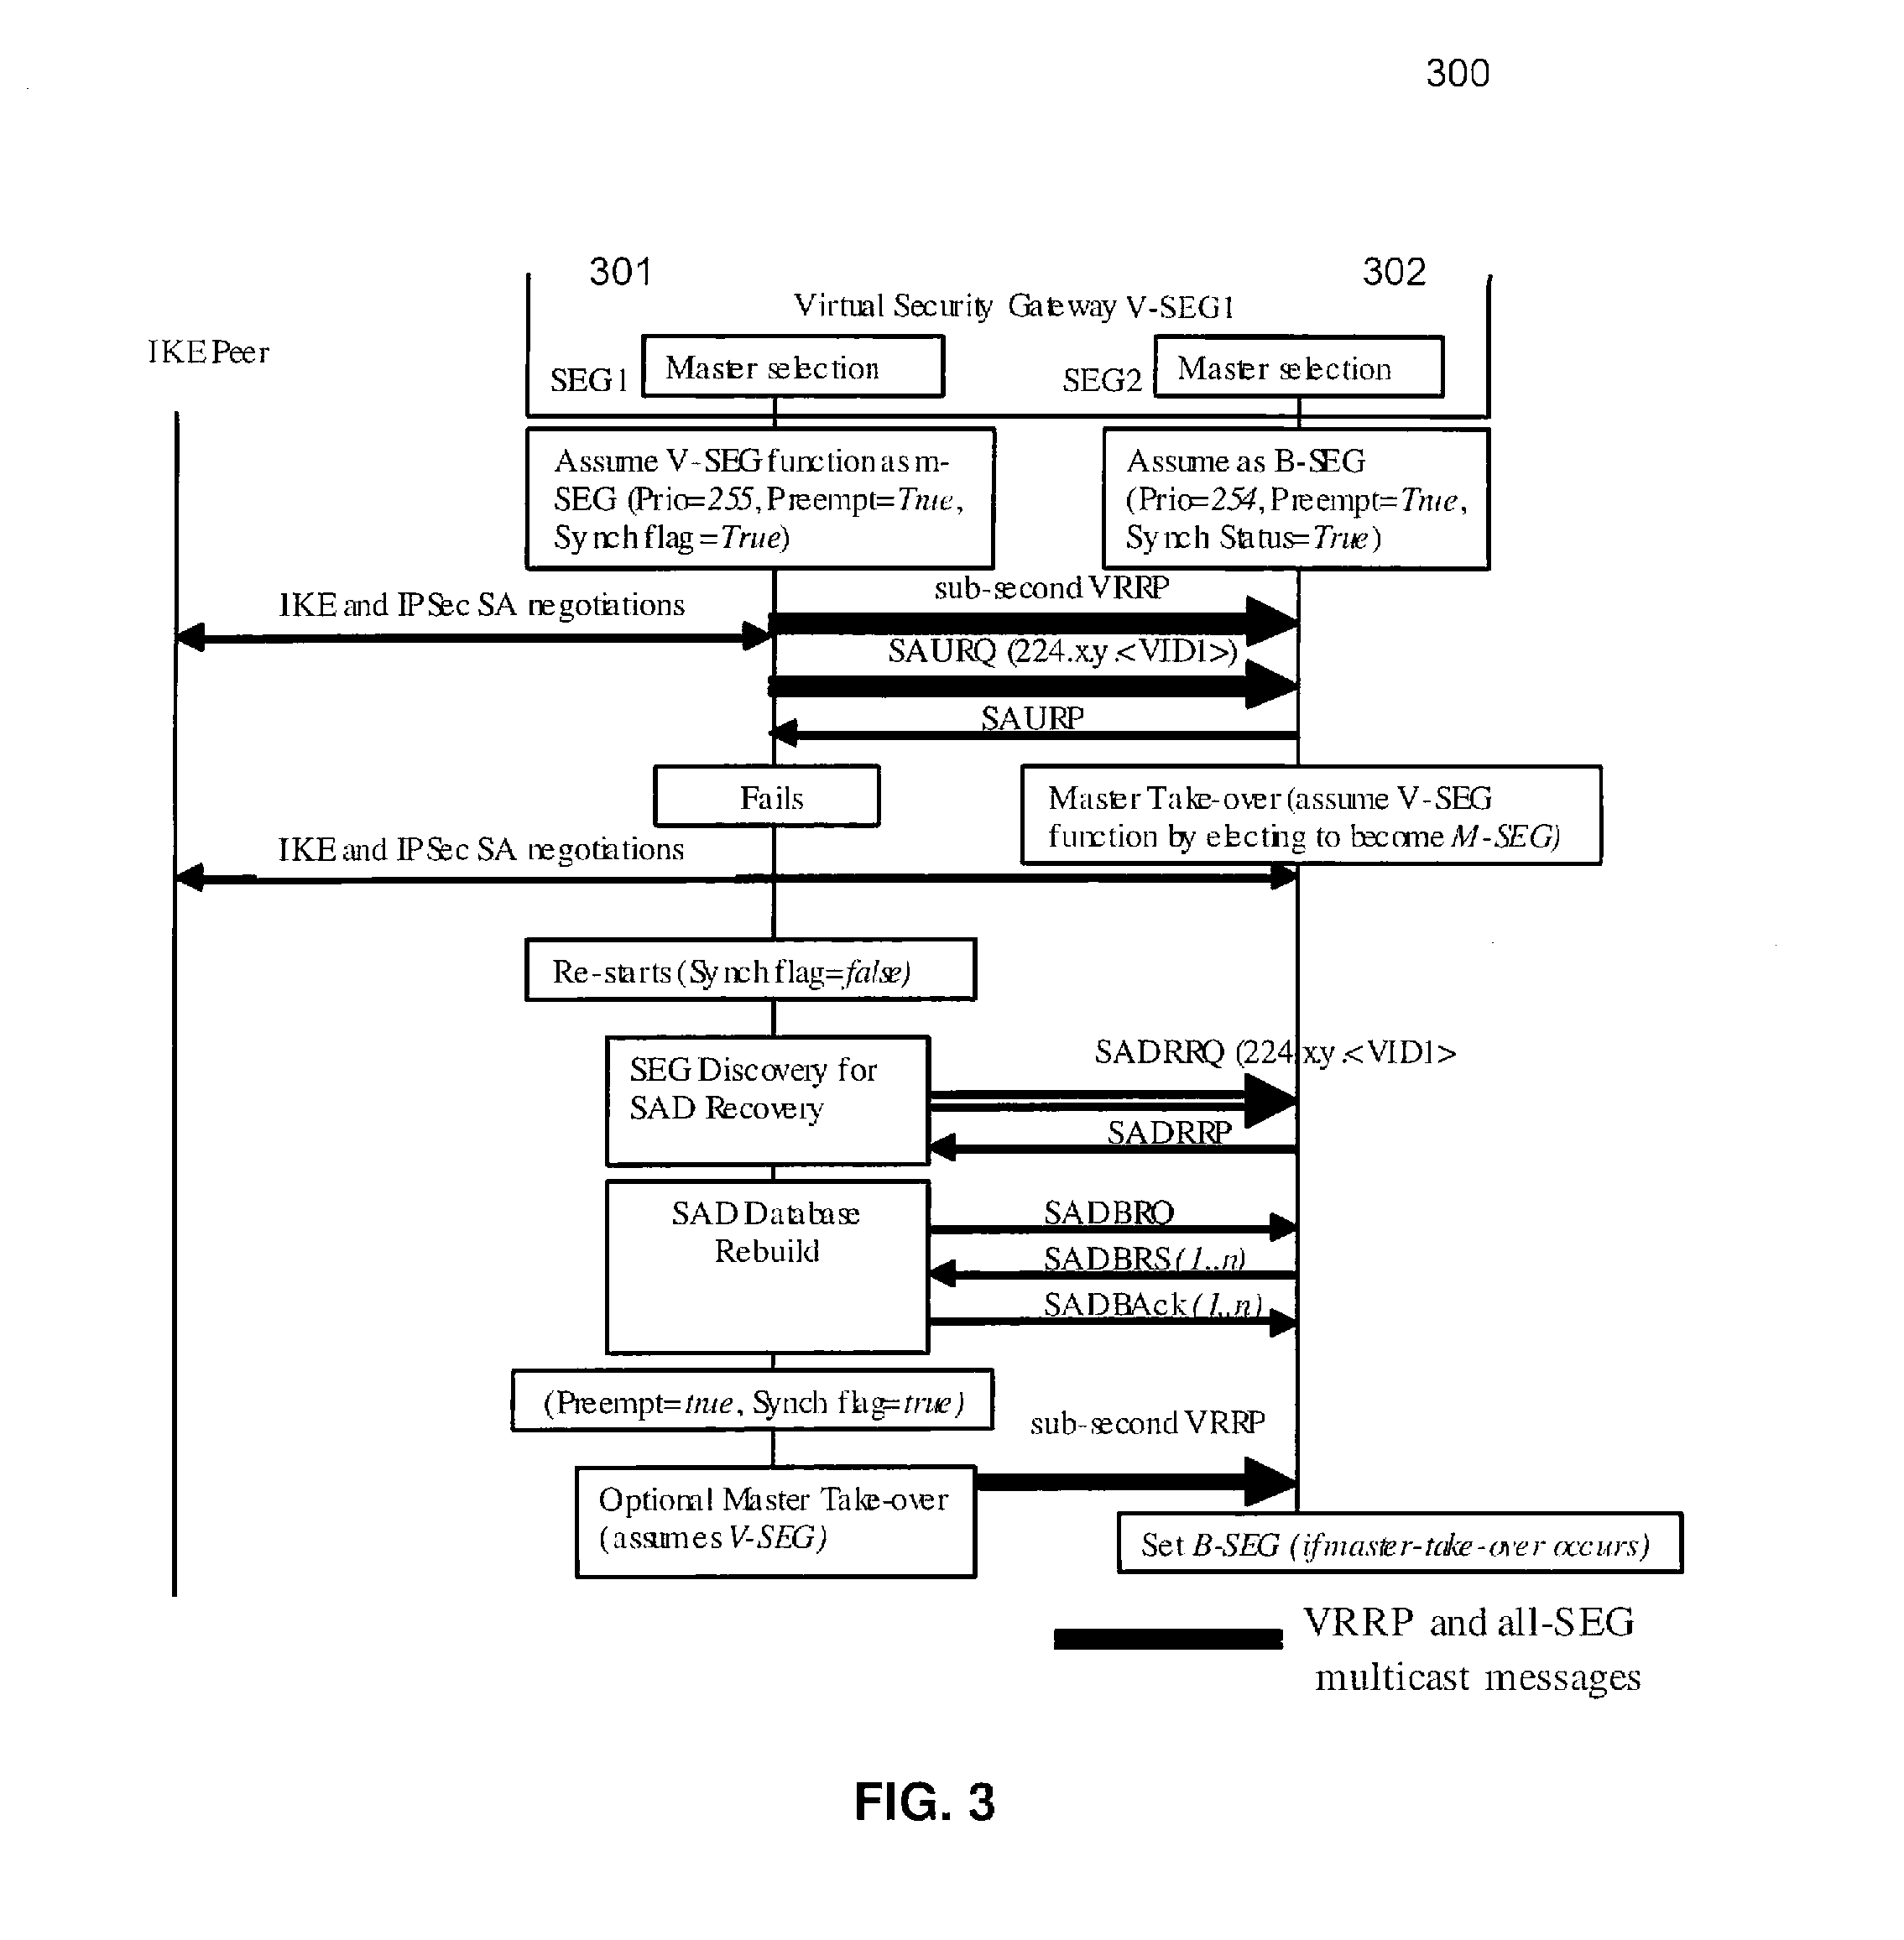 Apparatus and method for resilient IP security/internet key exchange security gateway